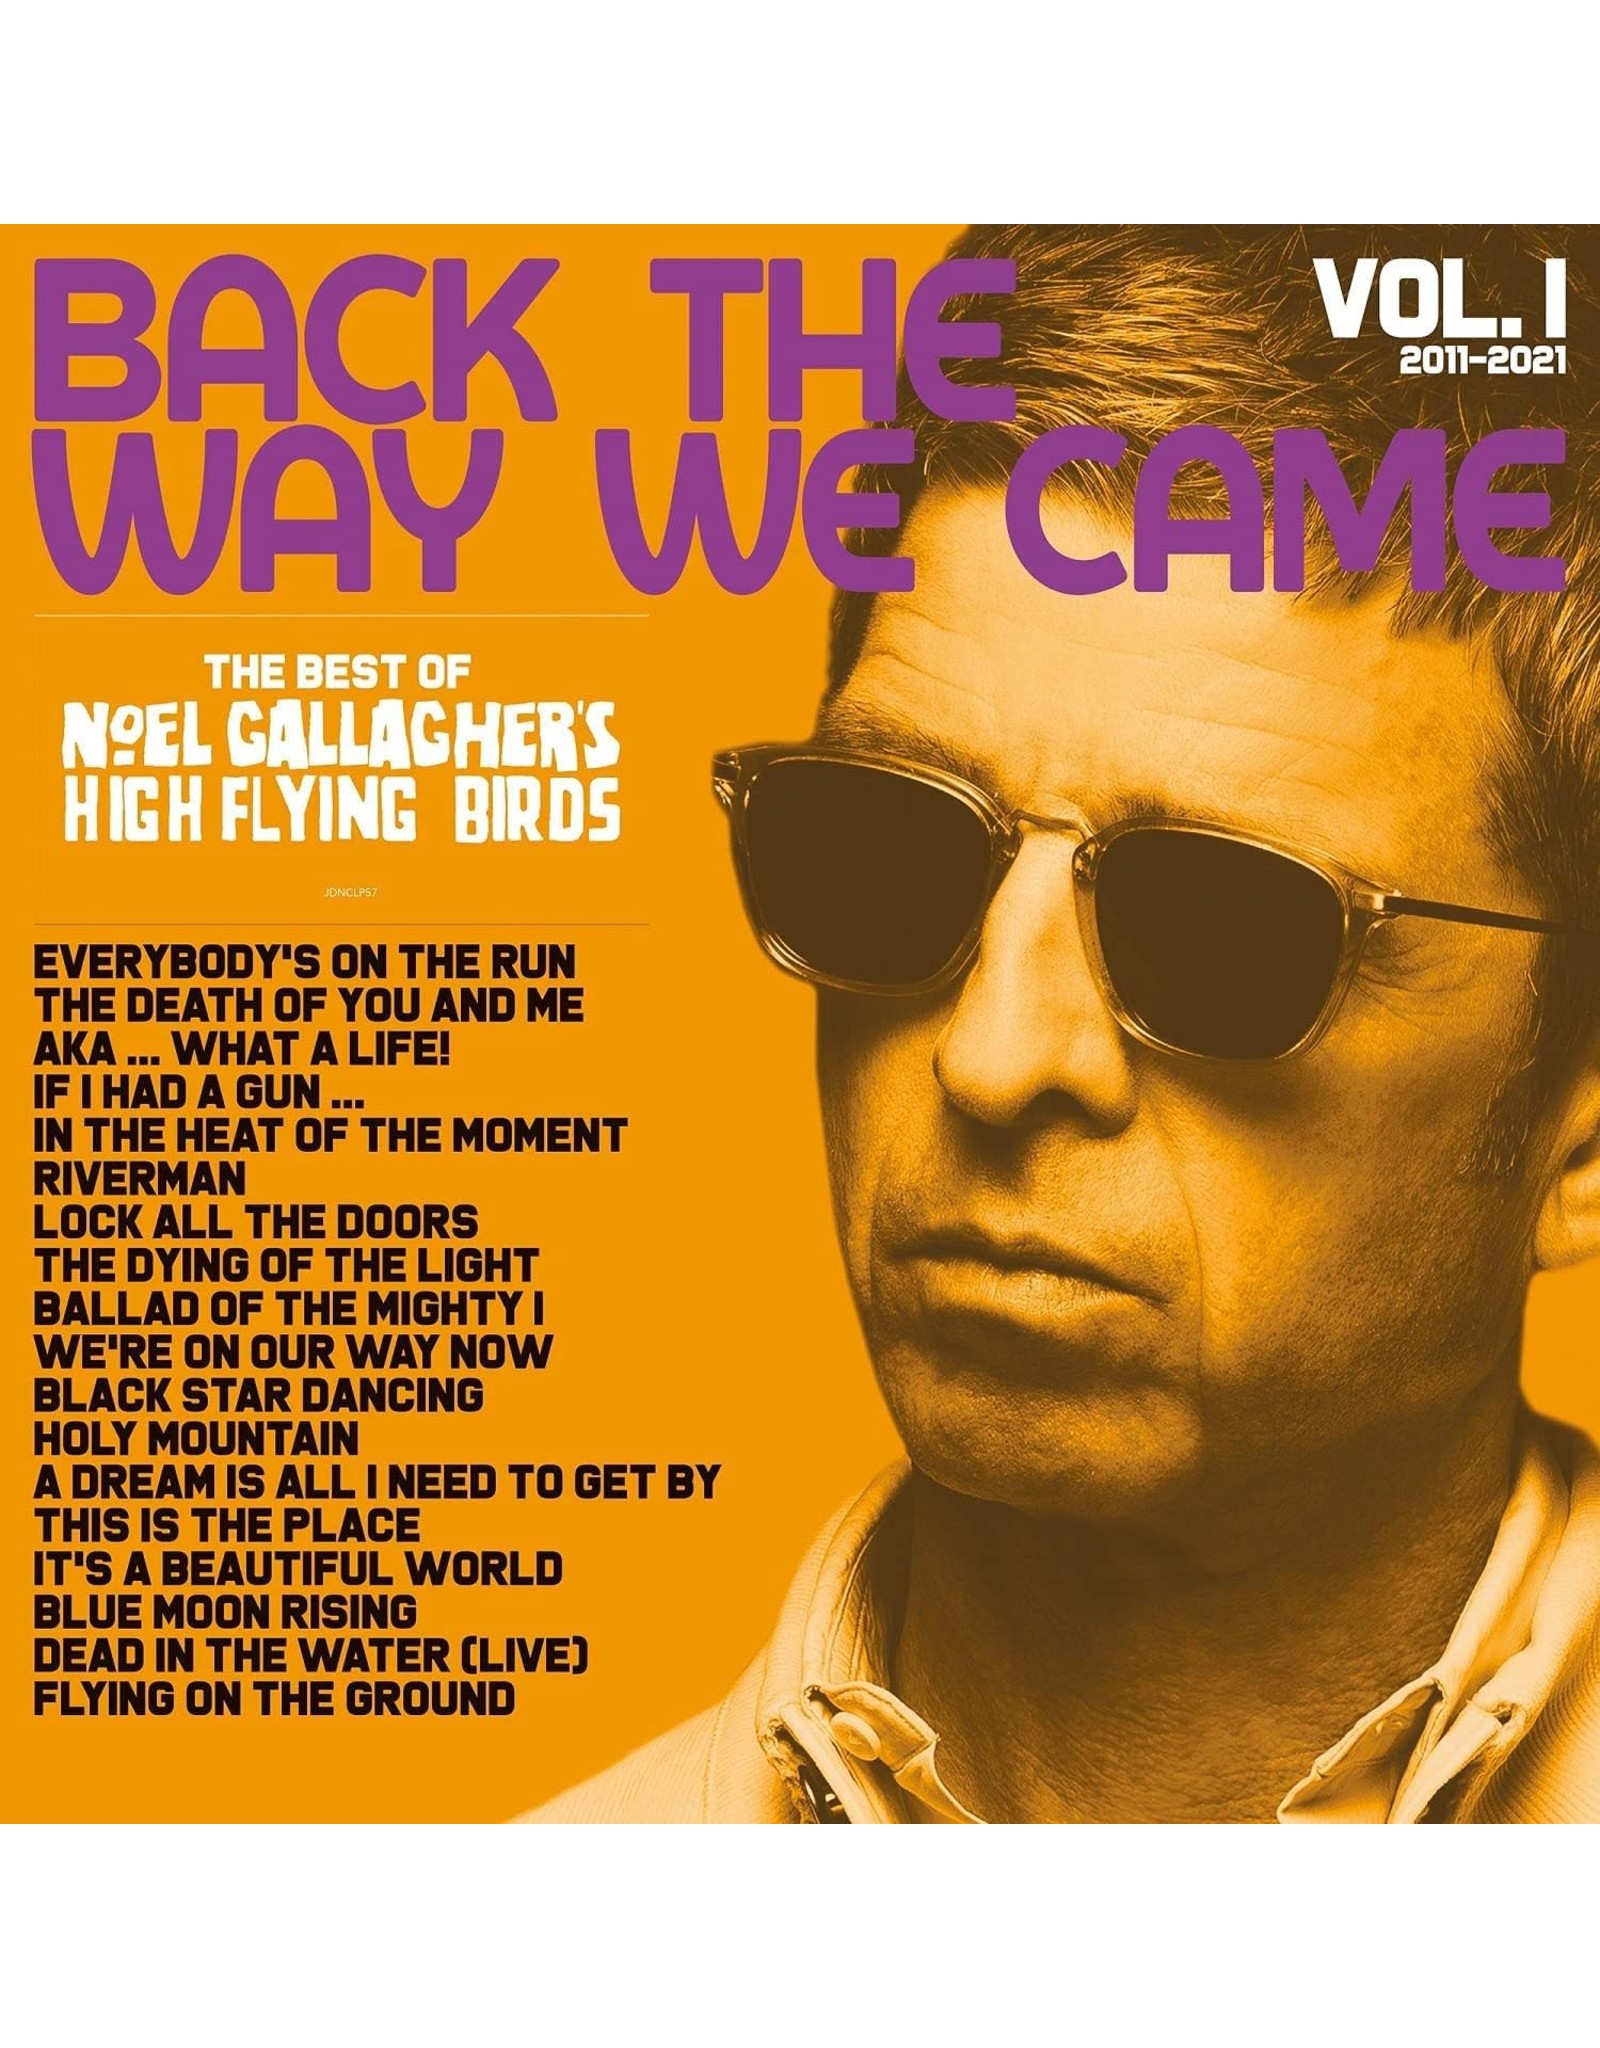 Noel Gallagher's High Flying Birds - Back The Way We Came: Vol. 1 (2011 -  2021)